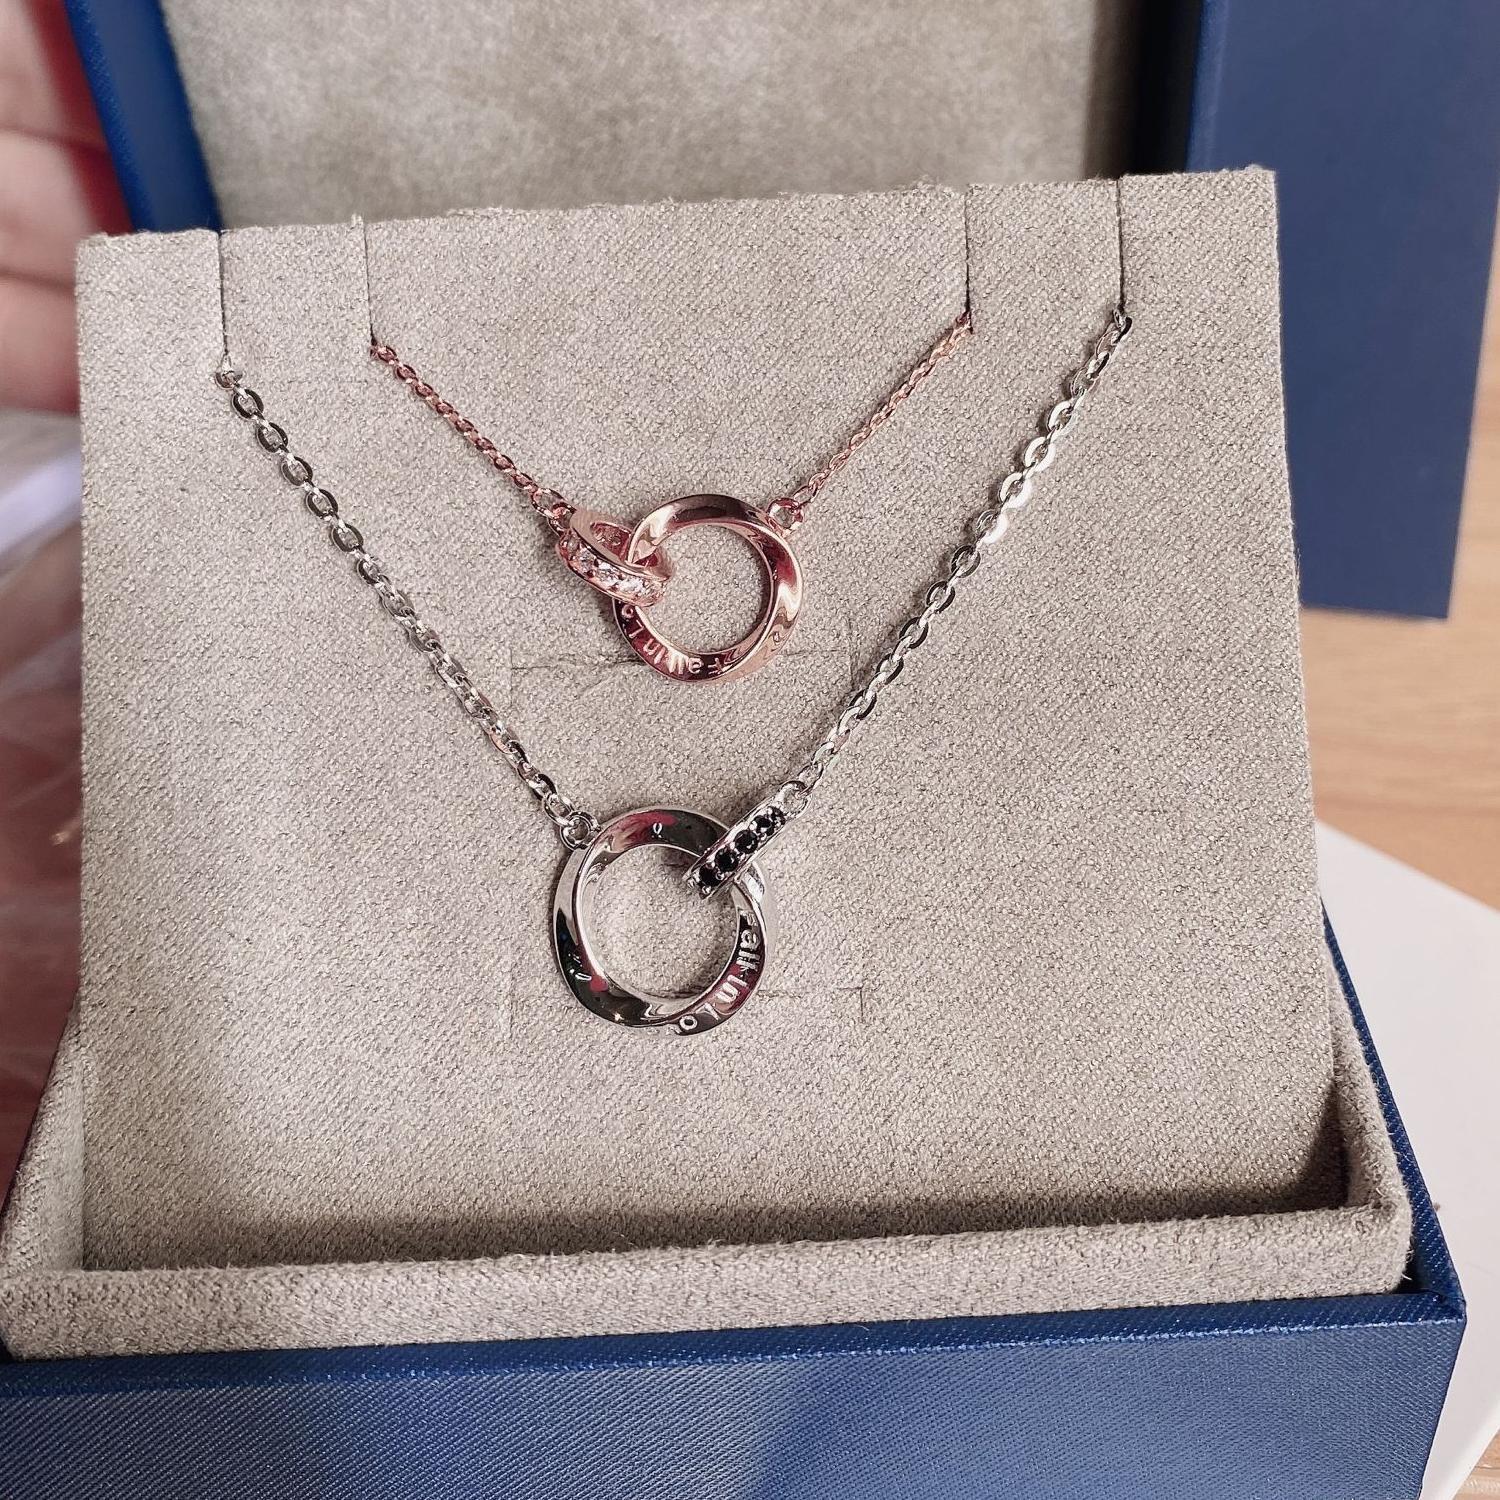 Unique Infinity Love Matching Interlocking Ring Couple Necklaces In Sterling Silver - CoupleSets